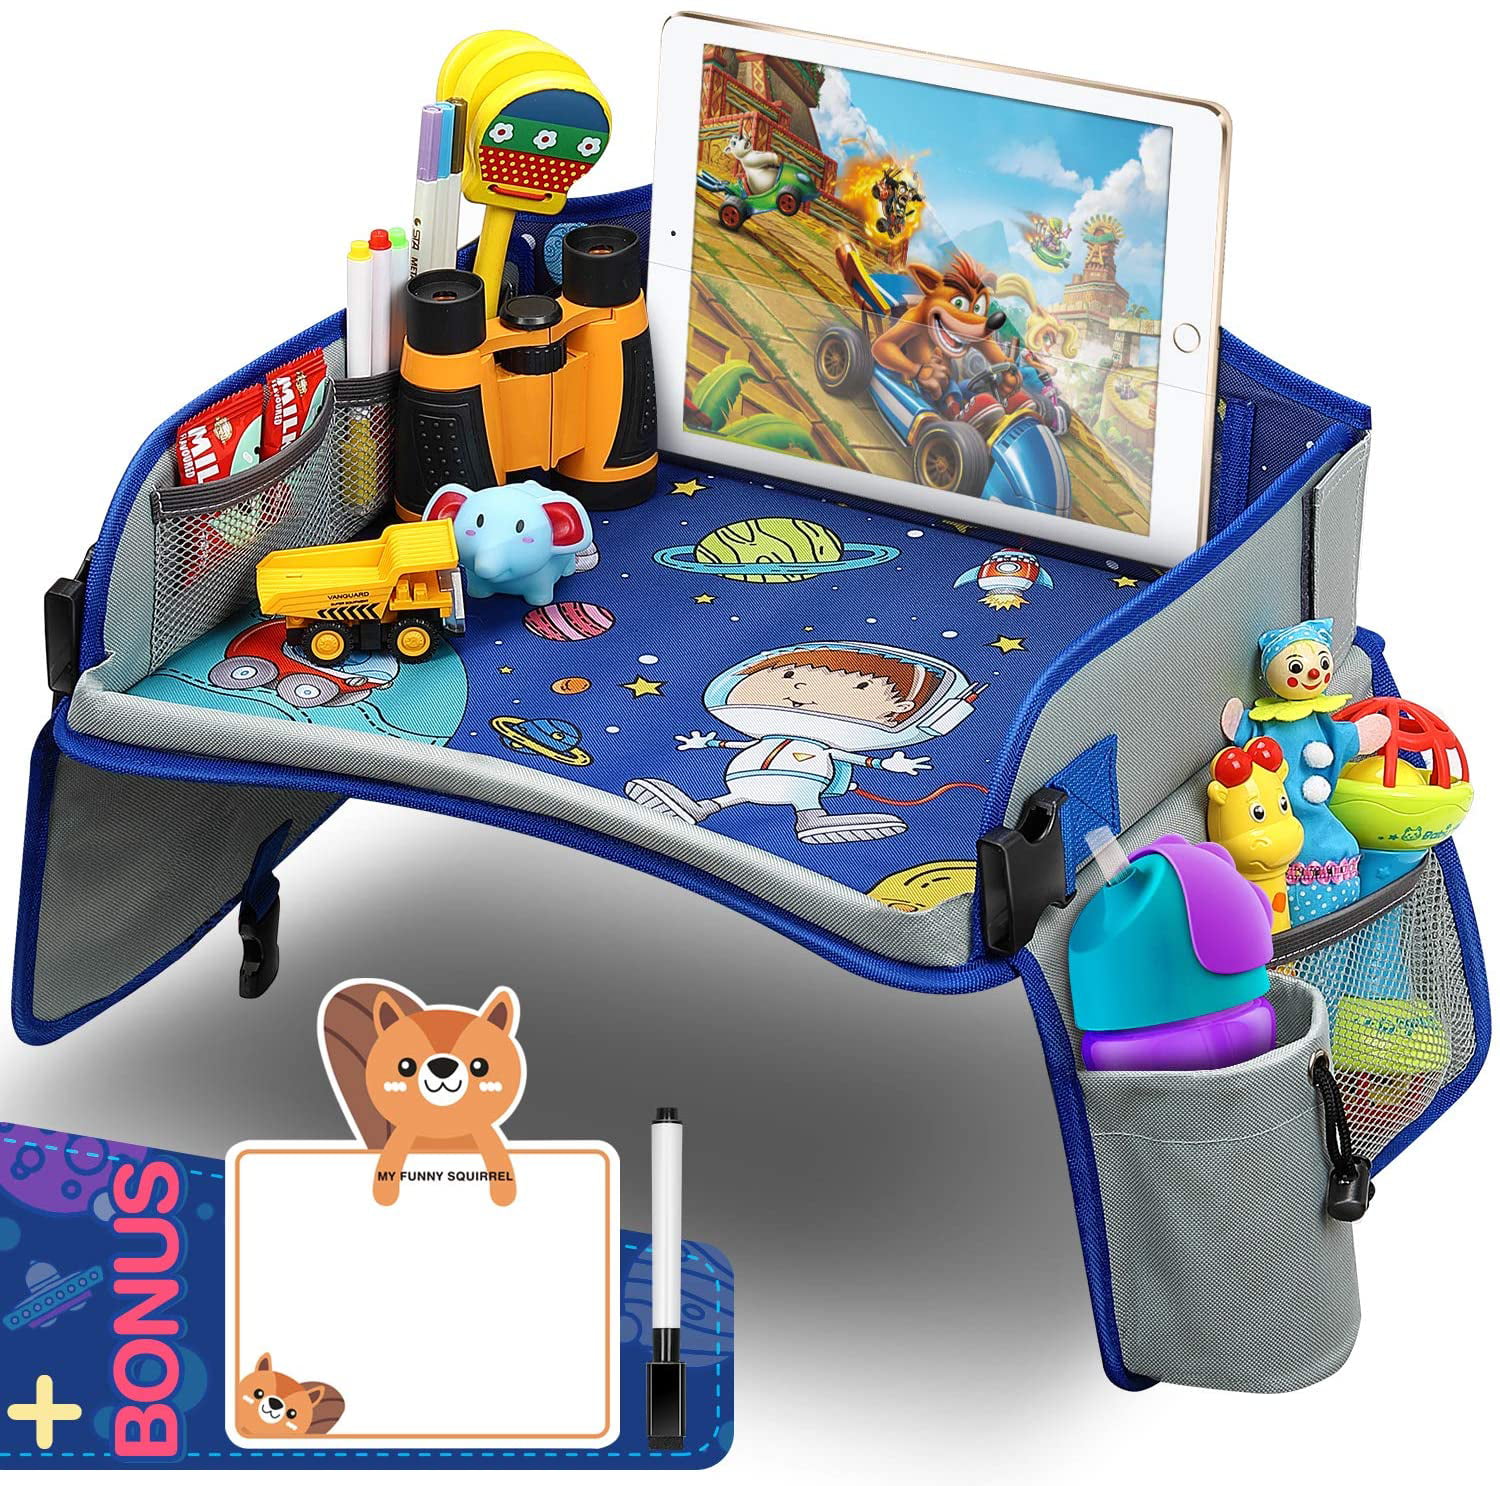 Stroller Table Great for Road Trips Airplane Seat Organizer Kids Carseat Travel Ipad Holder Stand Lap Desk for Eating Activity Tray Car Travel Tray for Kids 